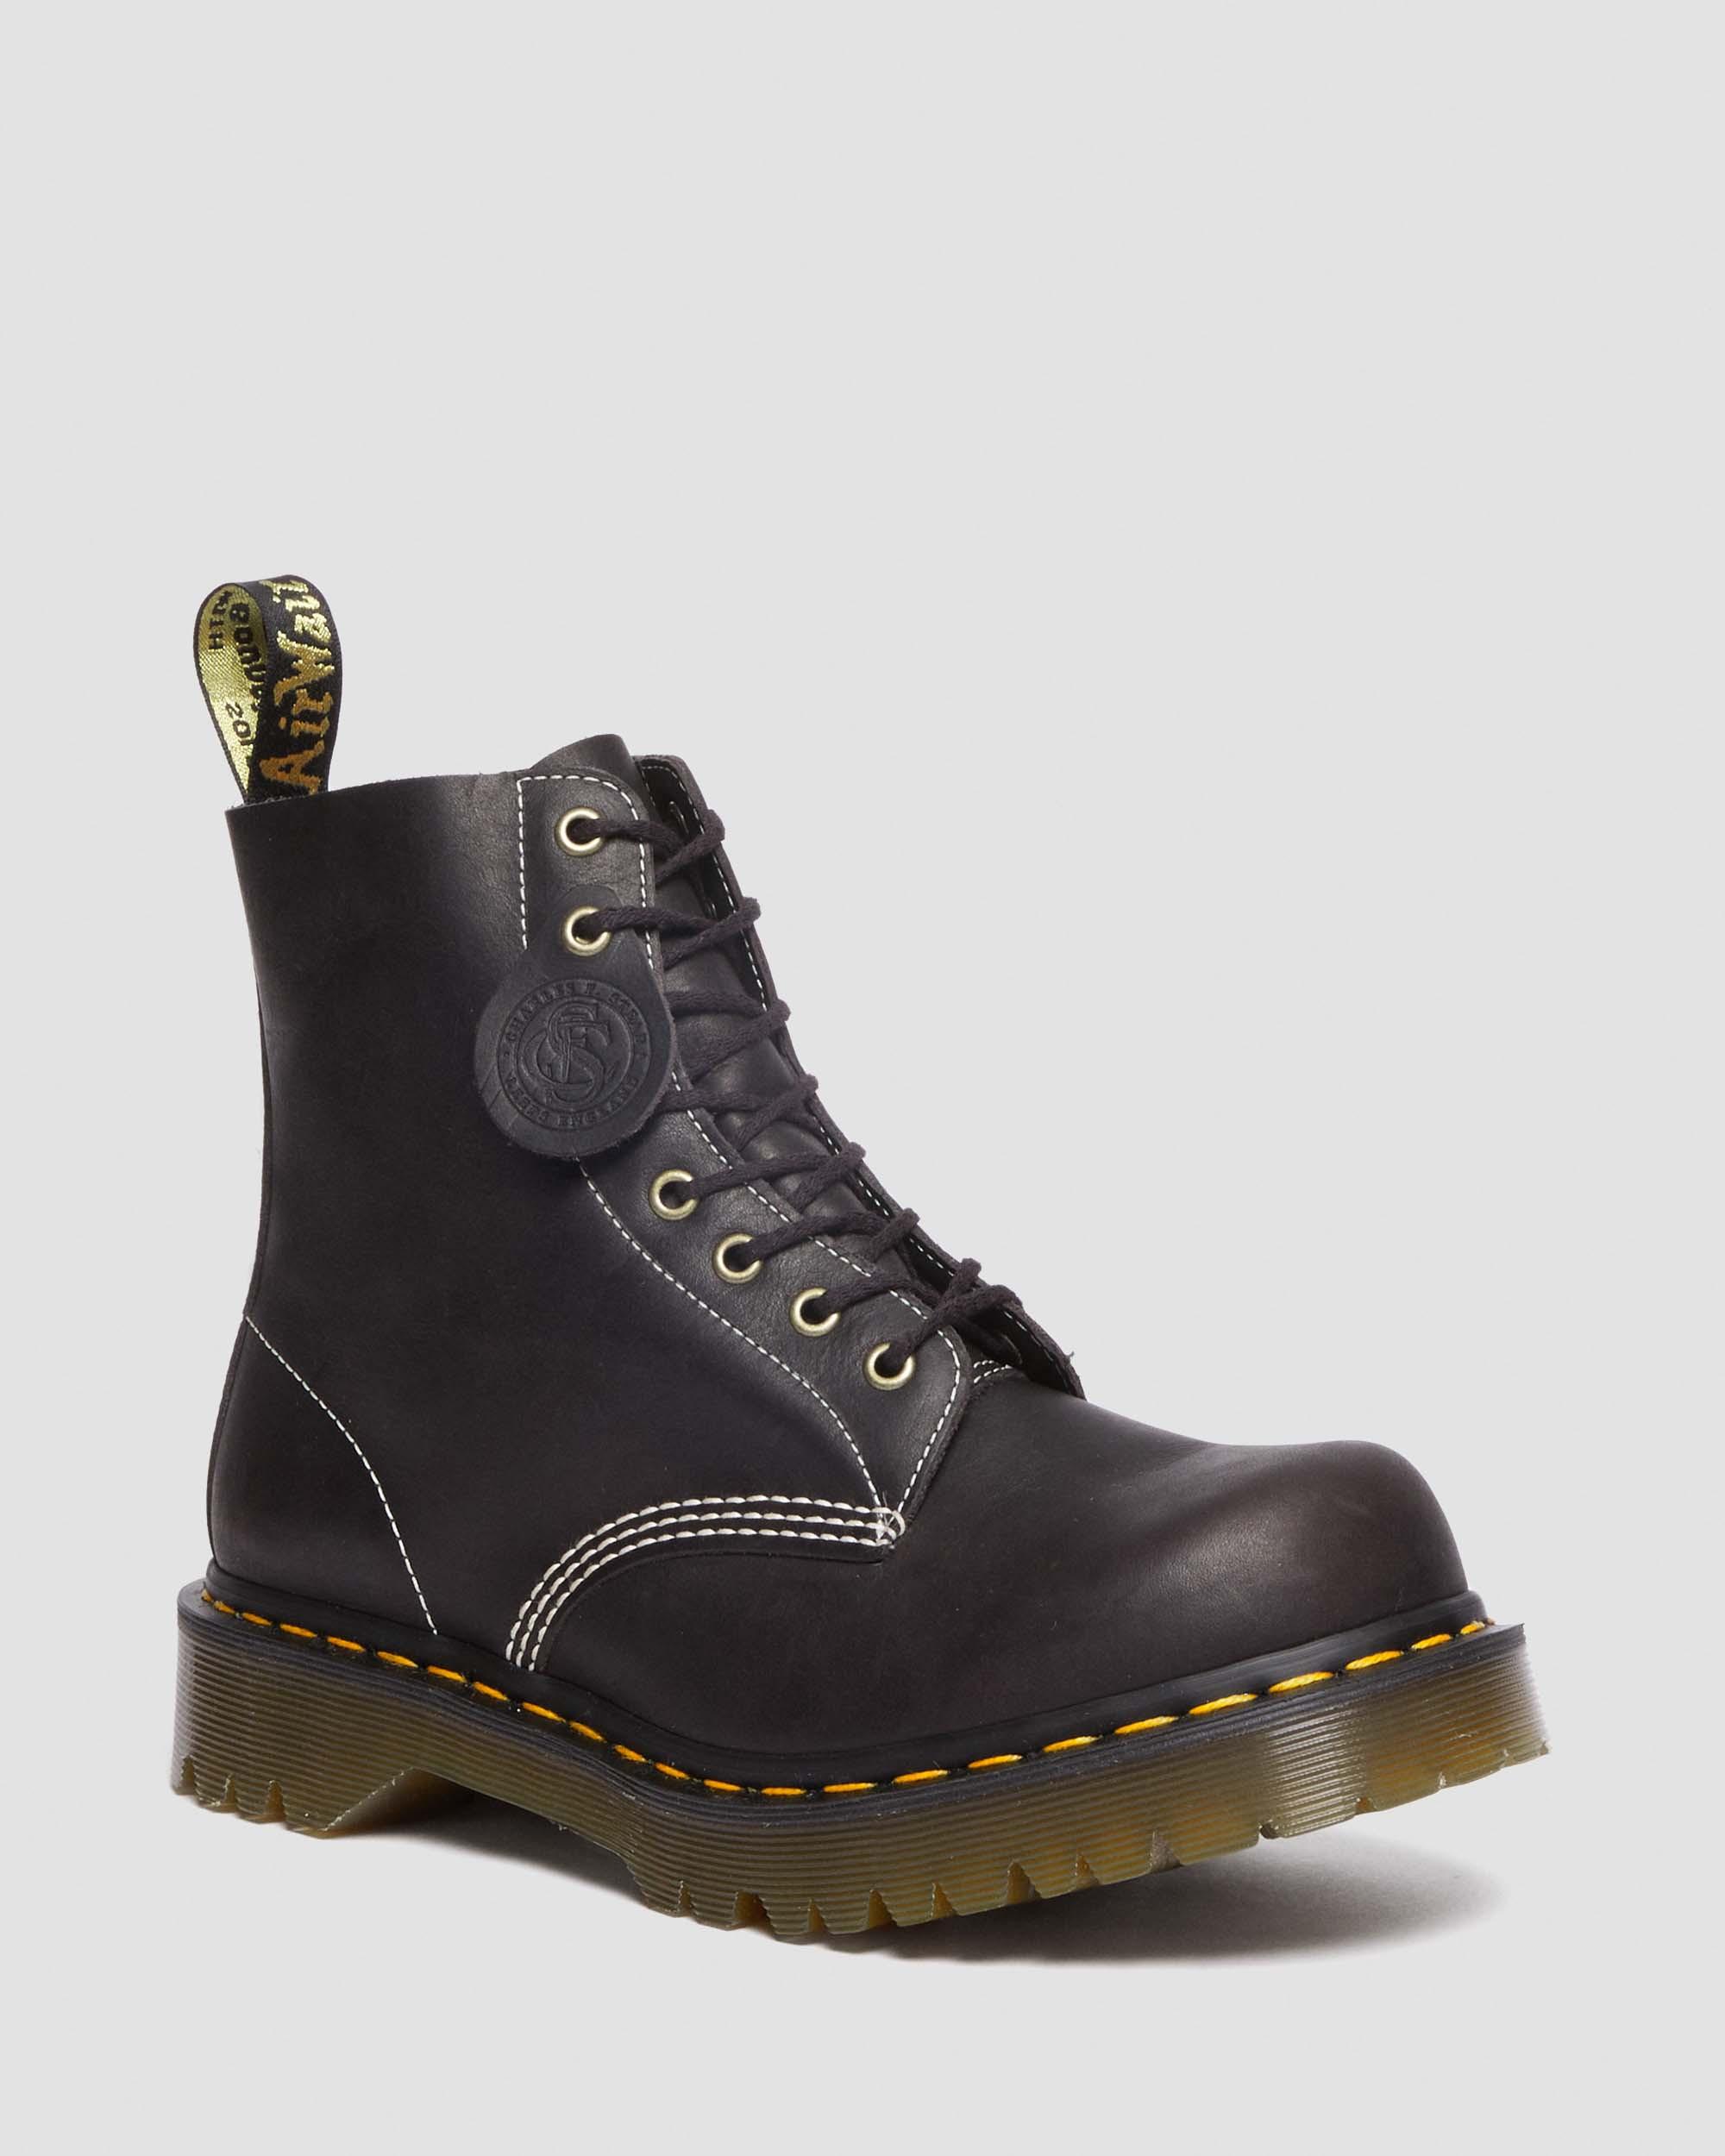 1460 Pascal Phoenix Leather Lace Up Boots in Charcoal Grey | Dr. Martens